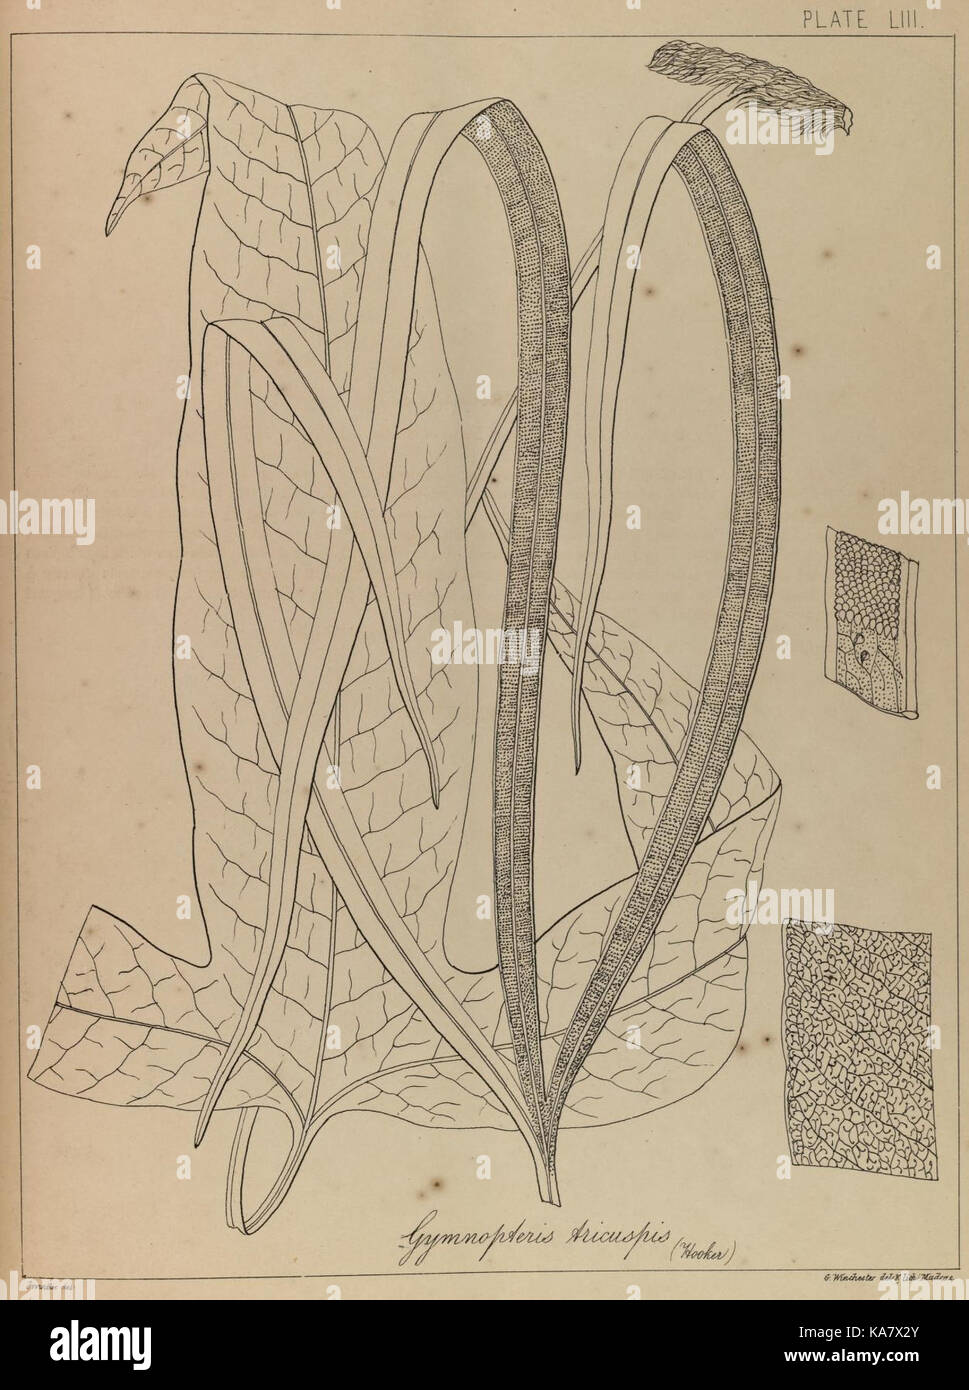 The ferns of British India (PLATE LIII) (8530291201) Stock Photo